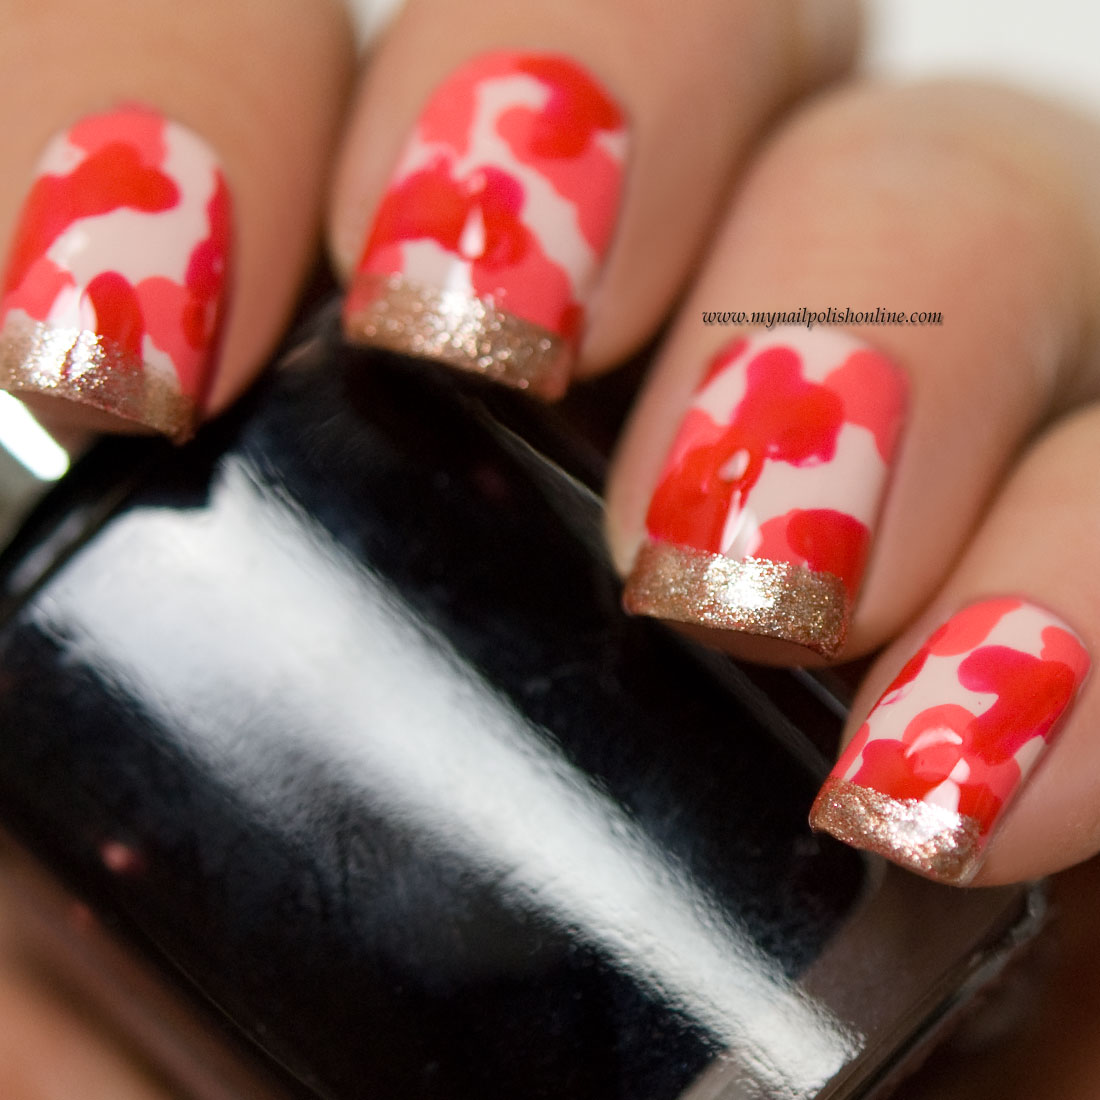 Camouflage nails with funky French